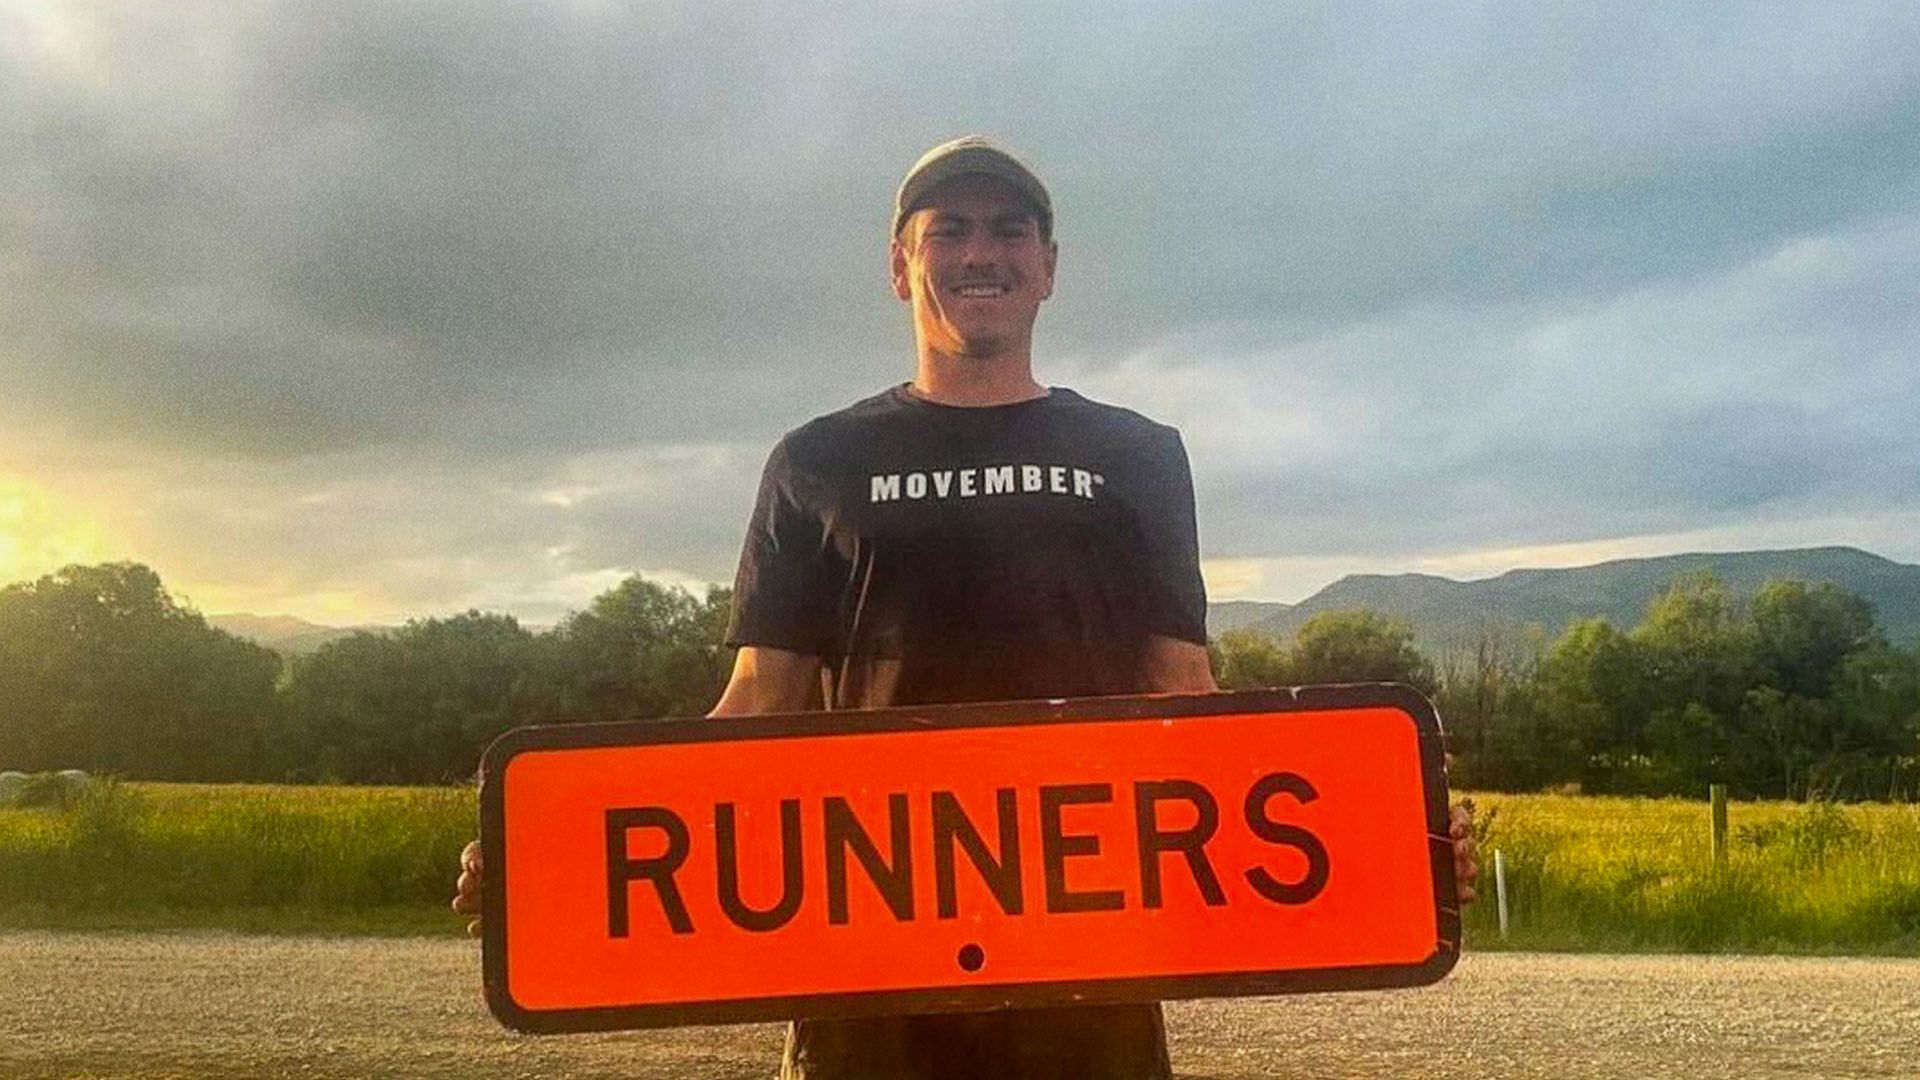 Young man stands on rural dirt road holding a street sign that says runners.